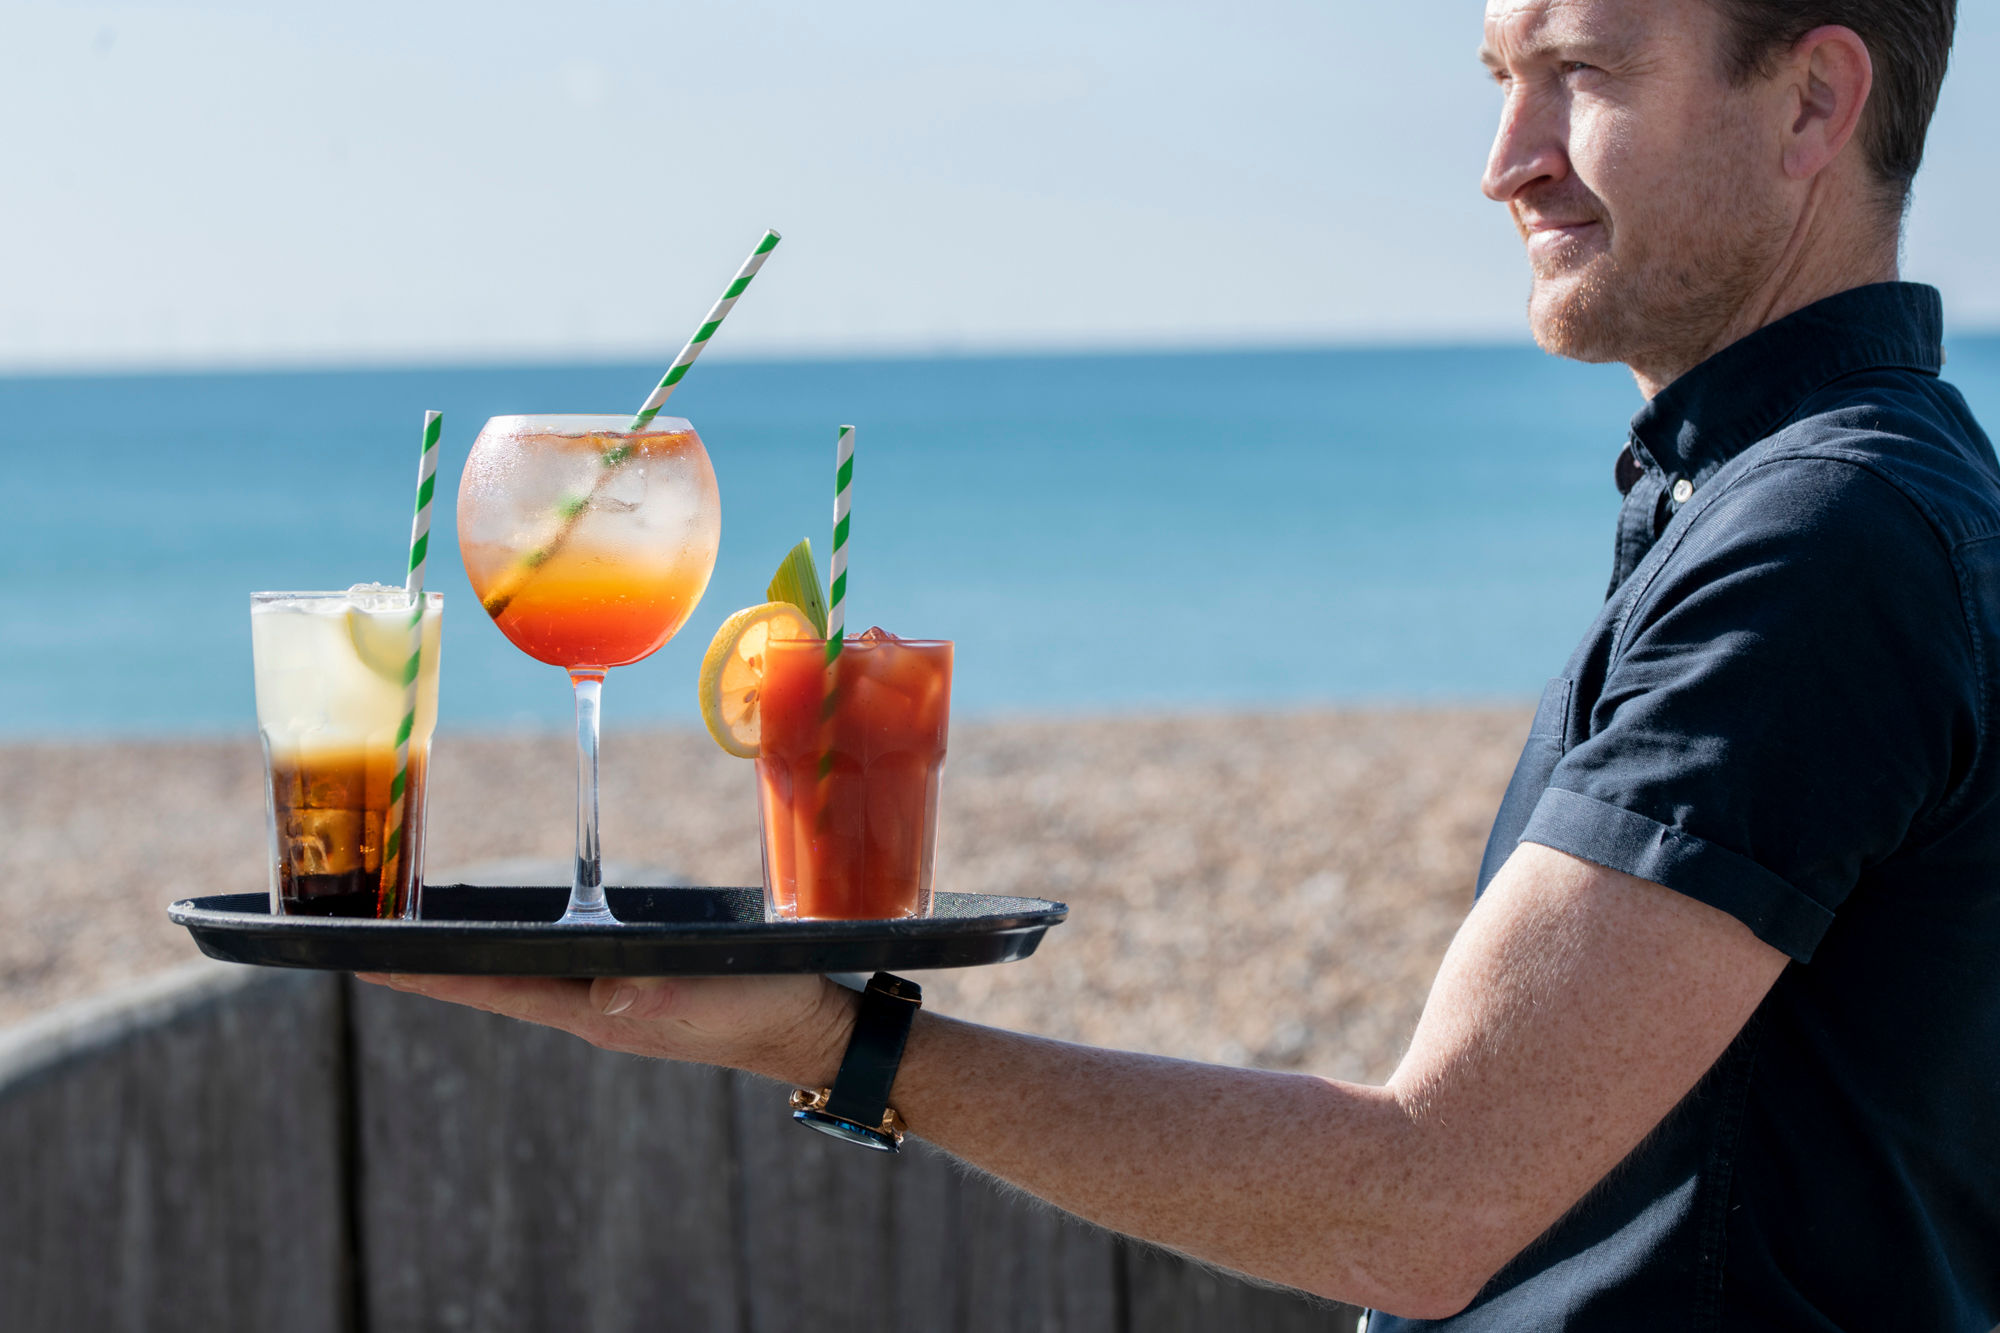 Man holding a tray with 3 cocktail glasses. Beach and sea in the background.